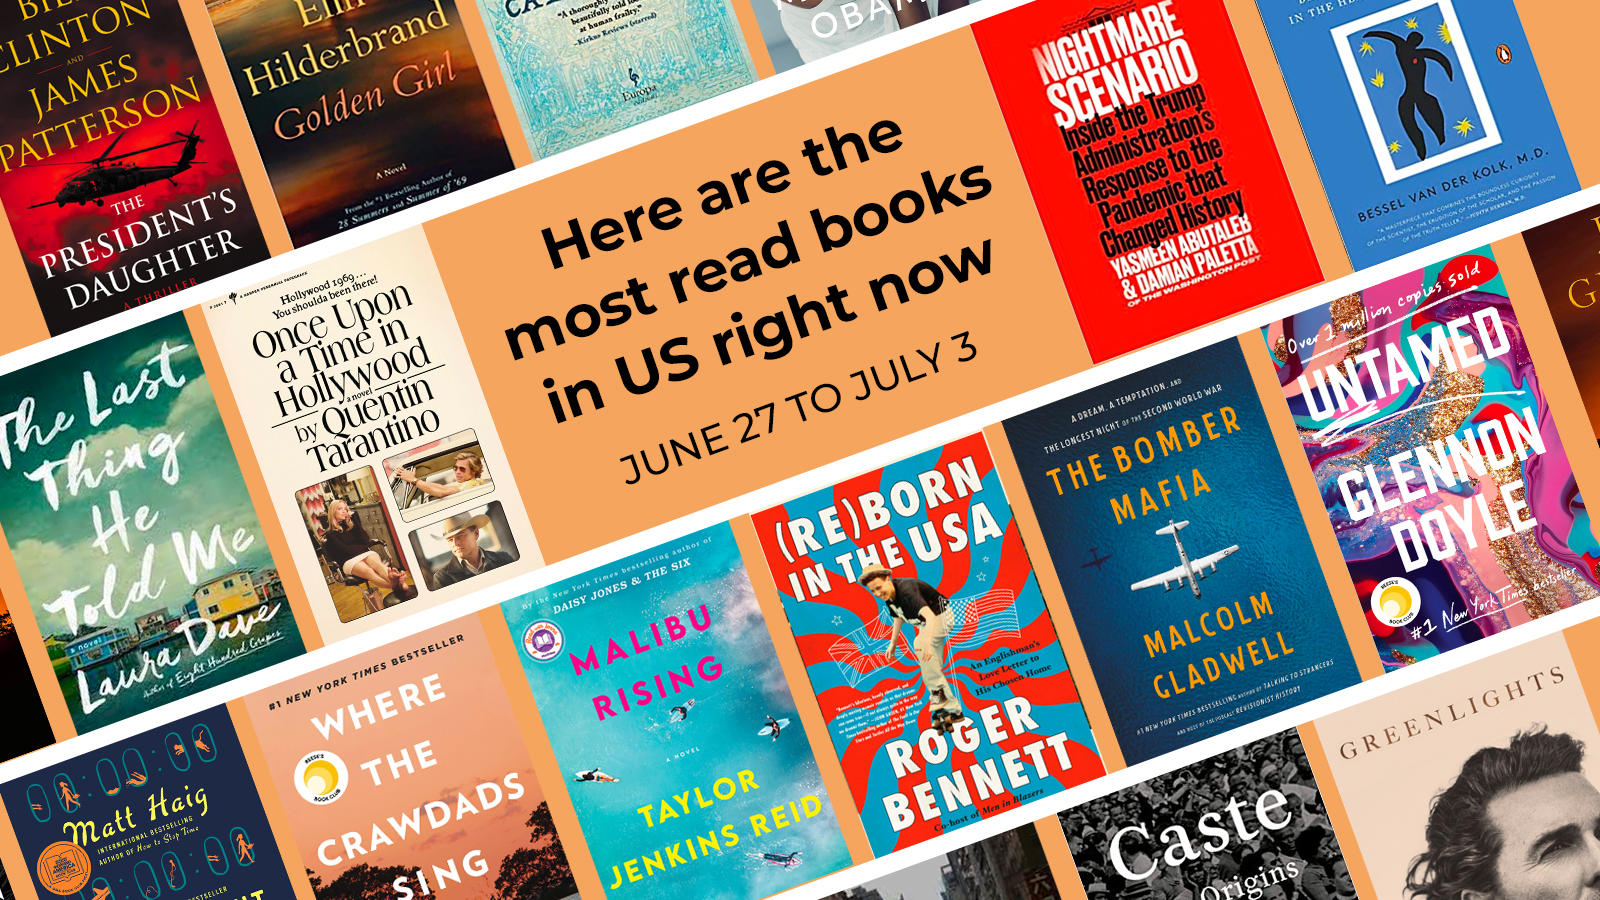 Here Are The Most Read Books In Us Right Now Times Of India